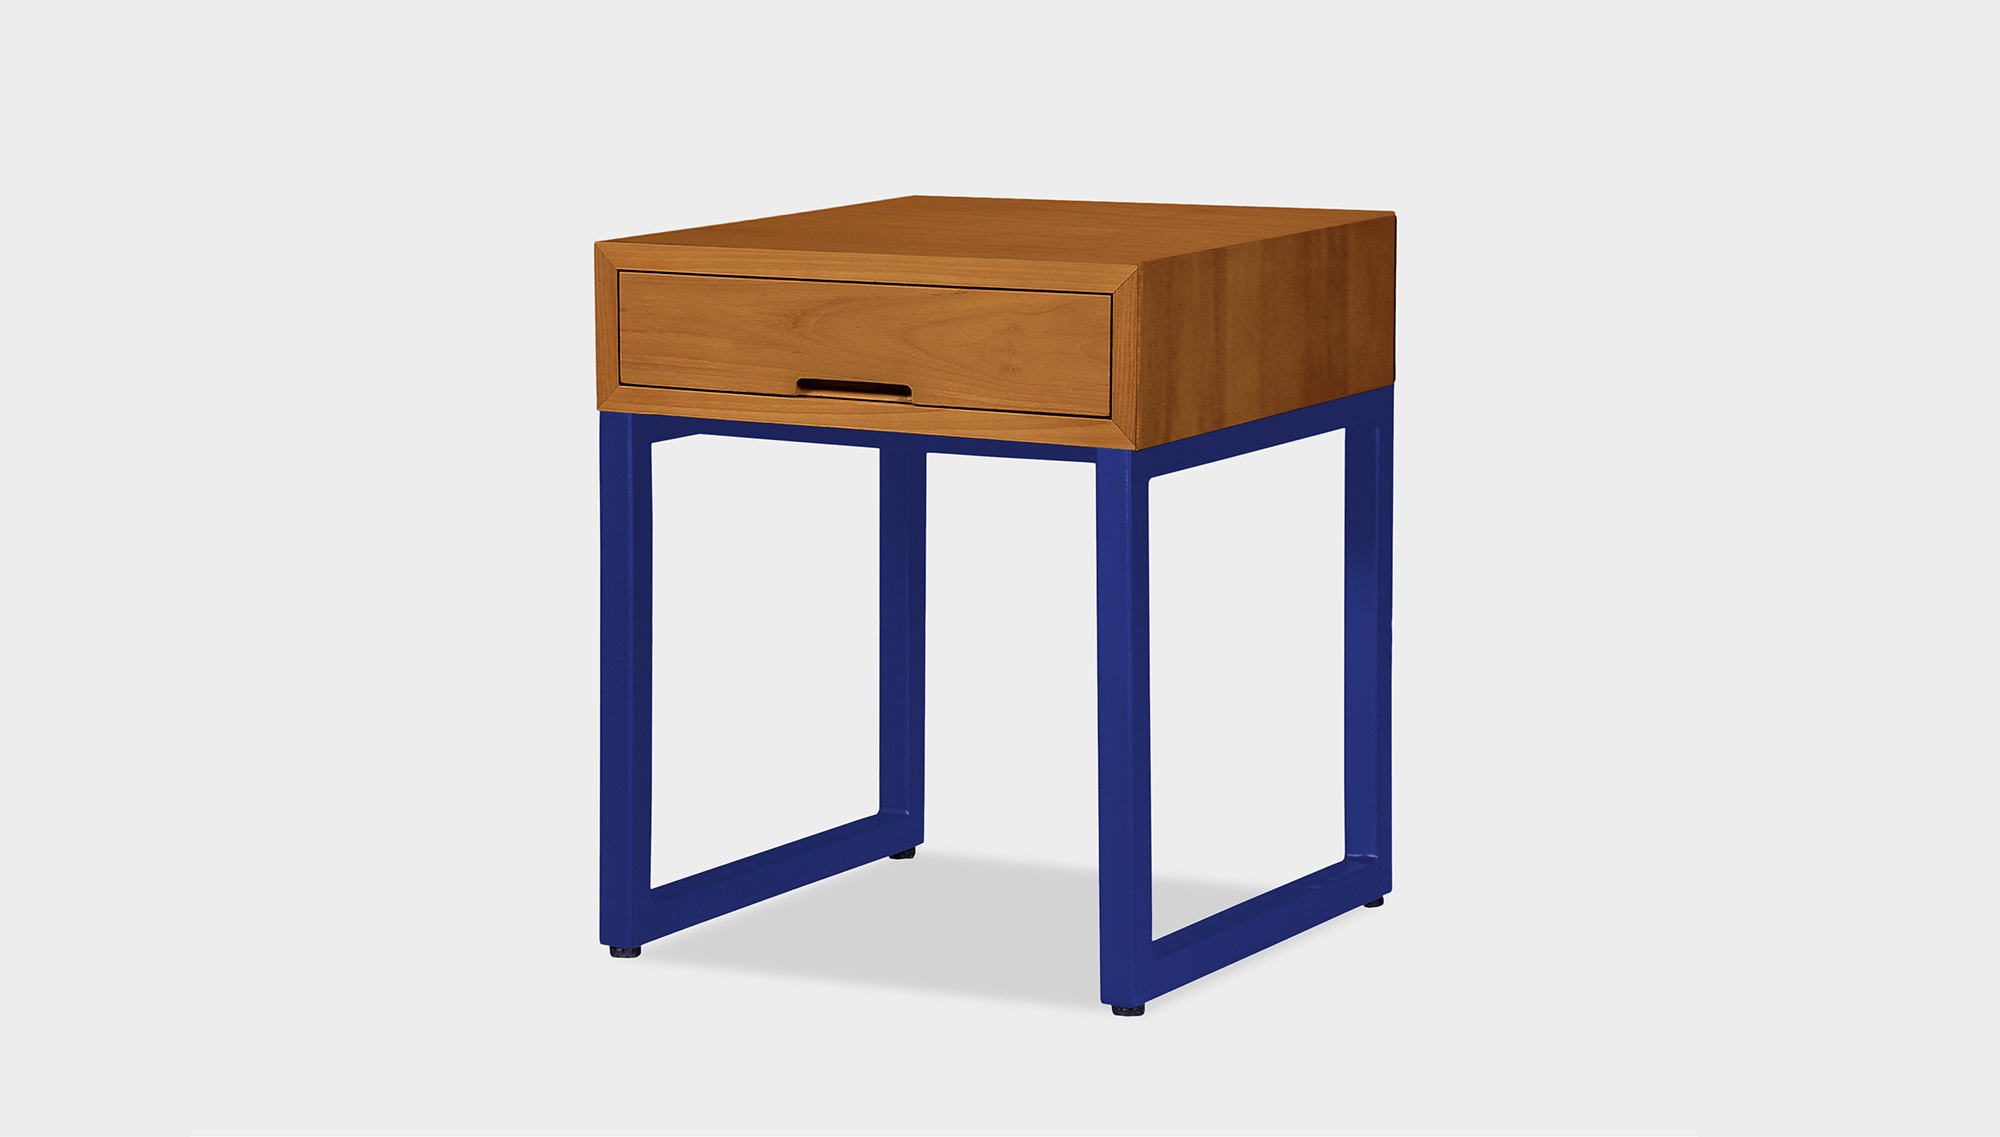 reddie-raw bedside table 45W x 45D x 55H *cm / Wood Teak~Natural / Metal~Navy Suzy Bedside Table High Square